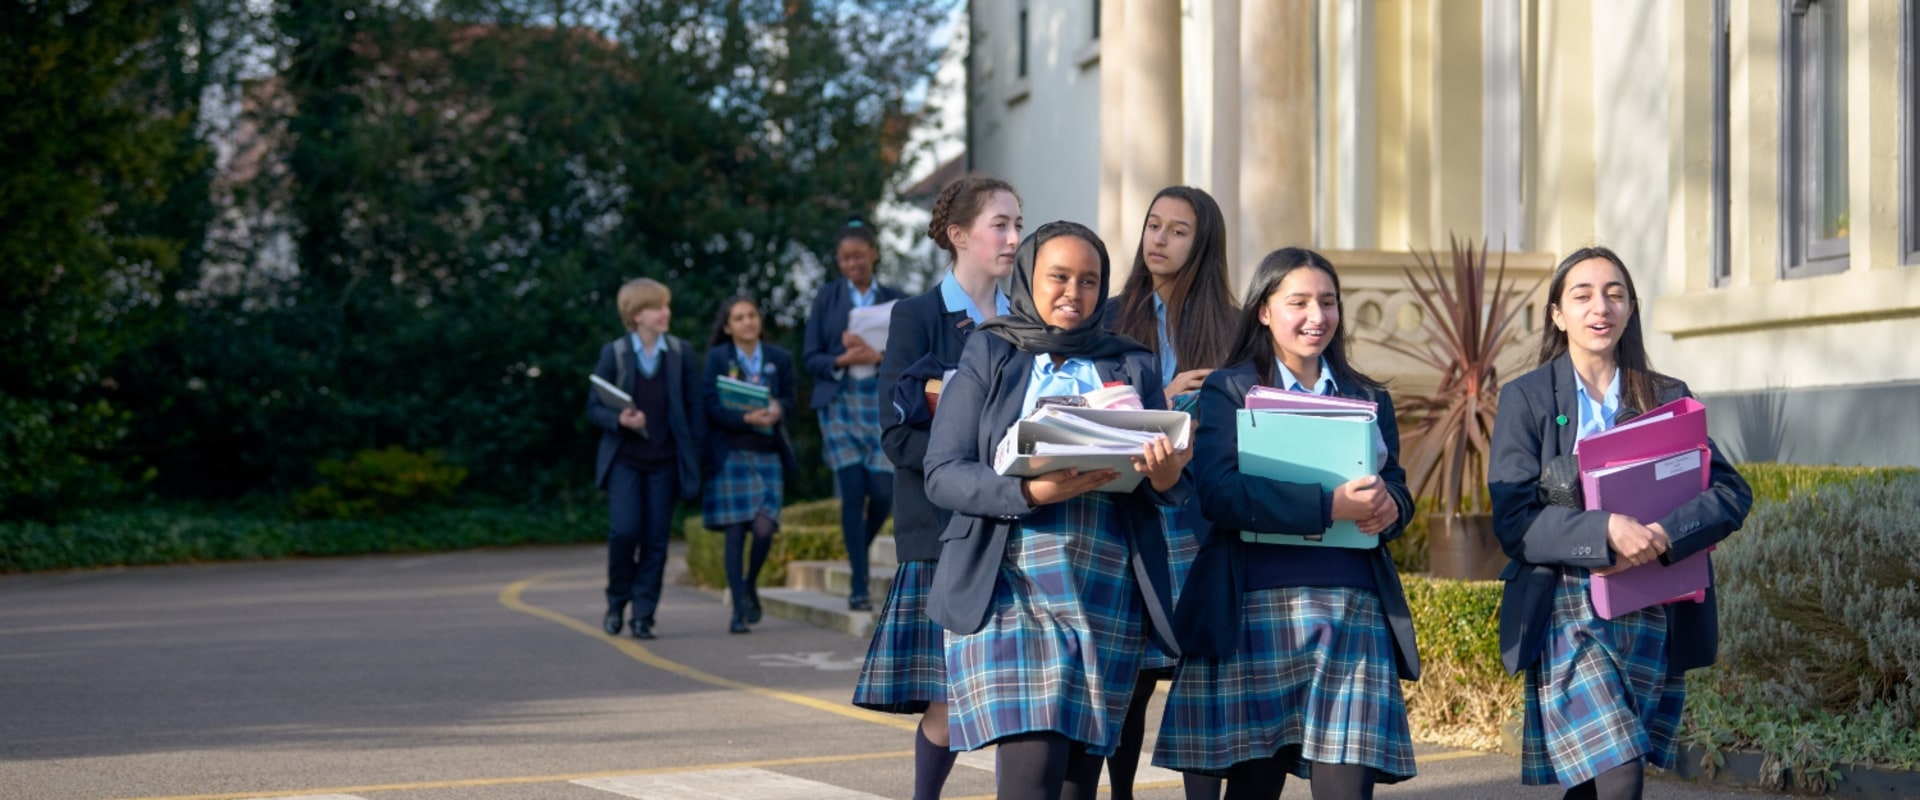 Christian Education in Leicestershire: Find the Best Private Schools and Universities